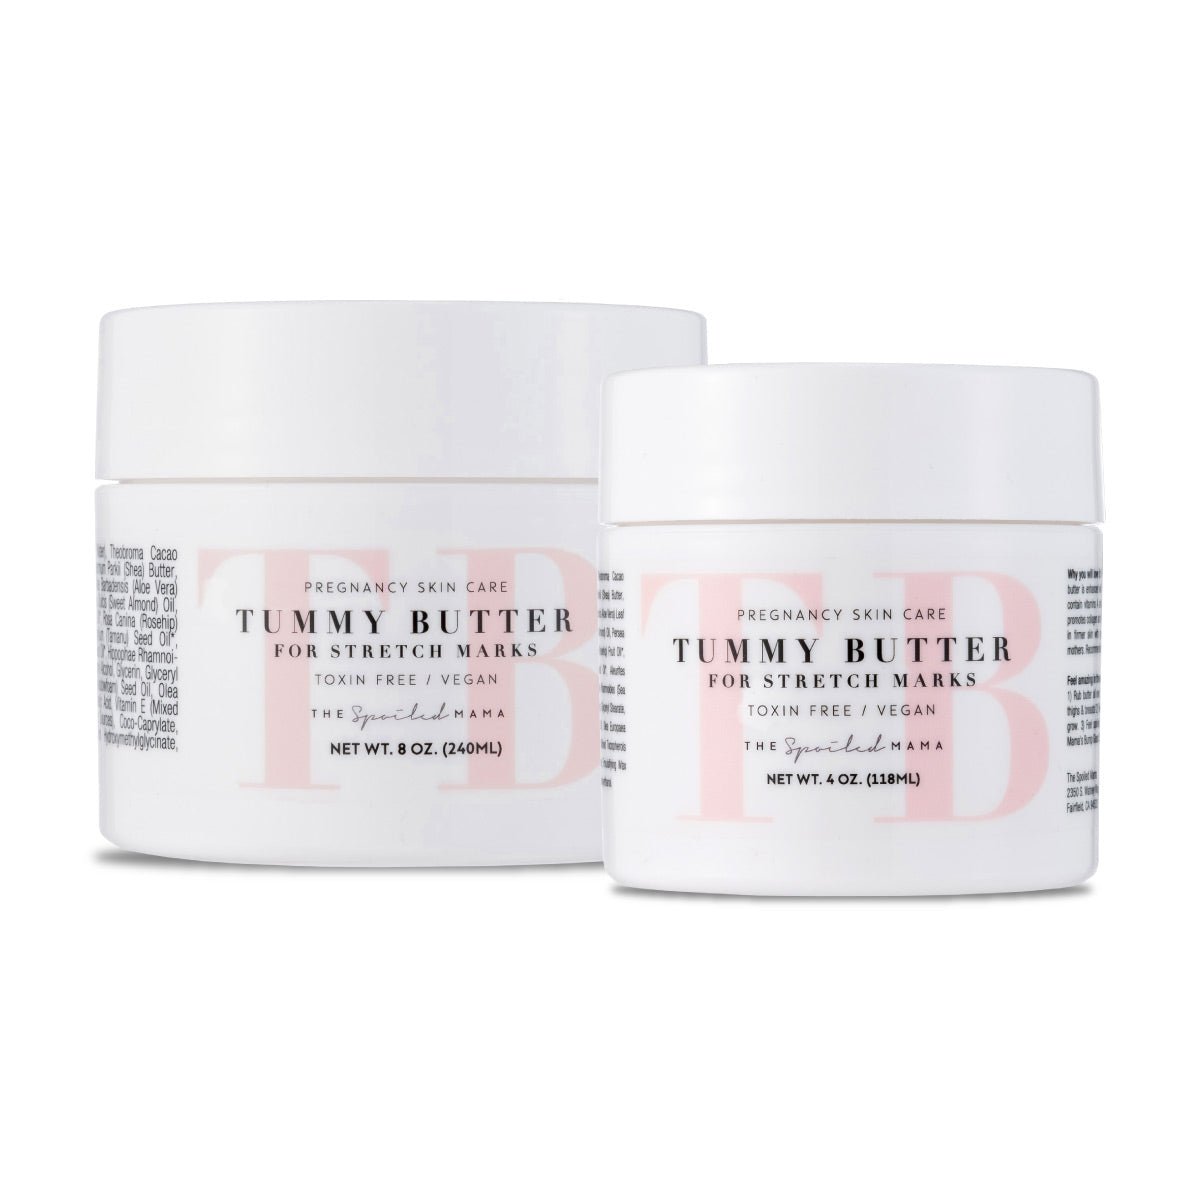 Tummy Butter for Stretch Marks by The Spoiled Mama